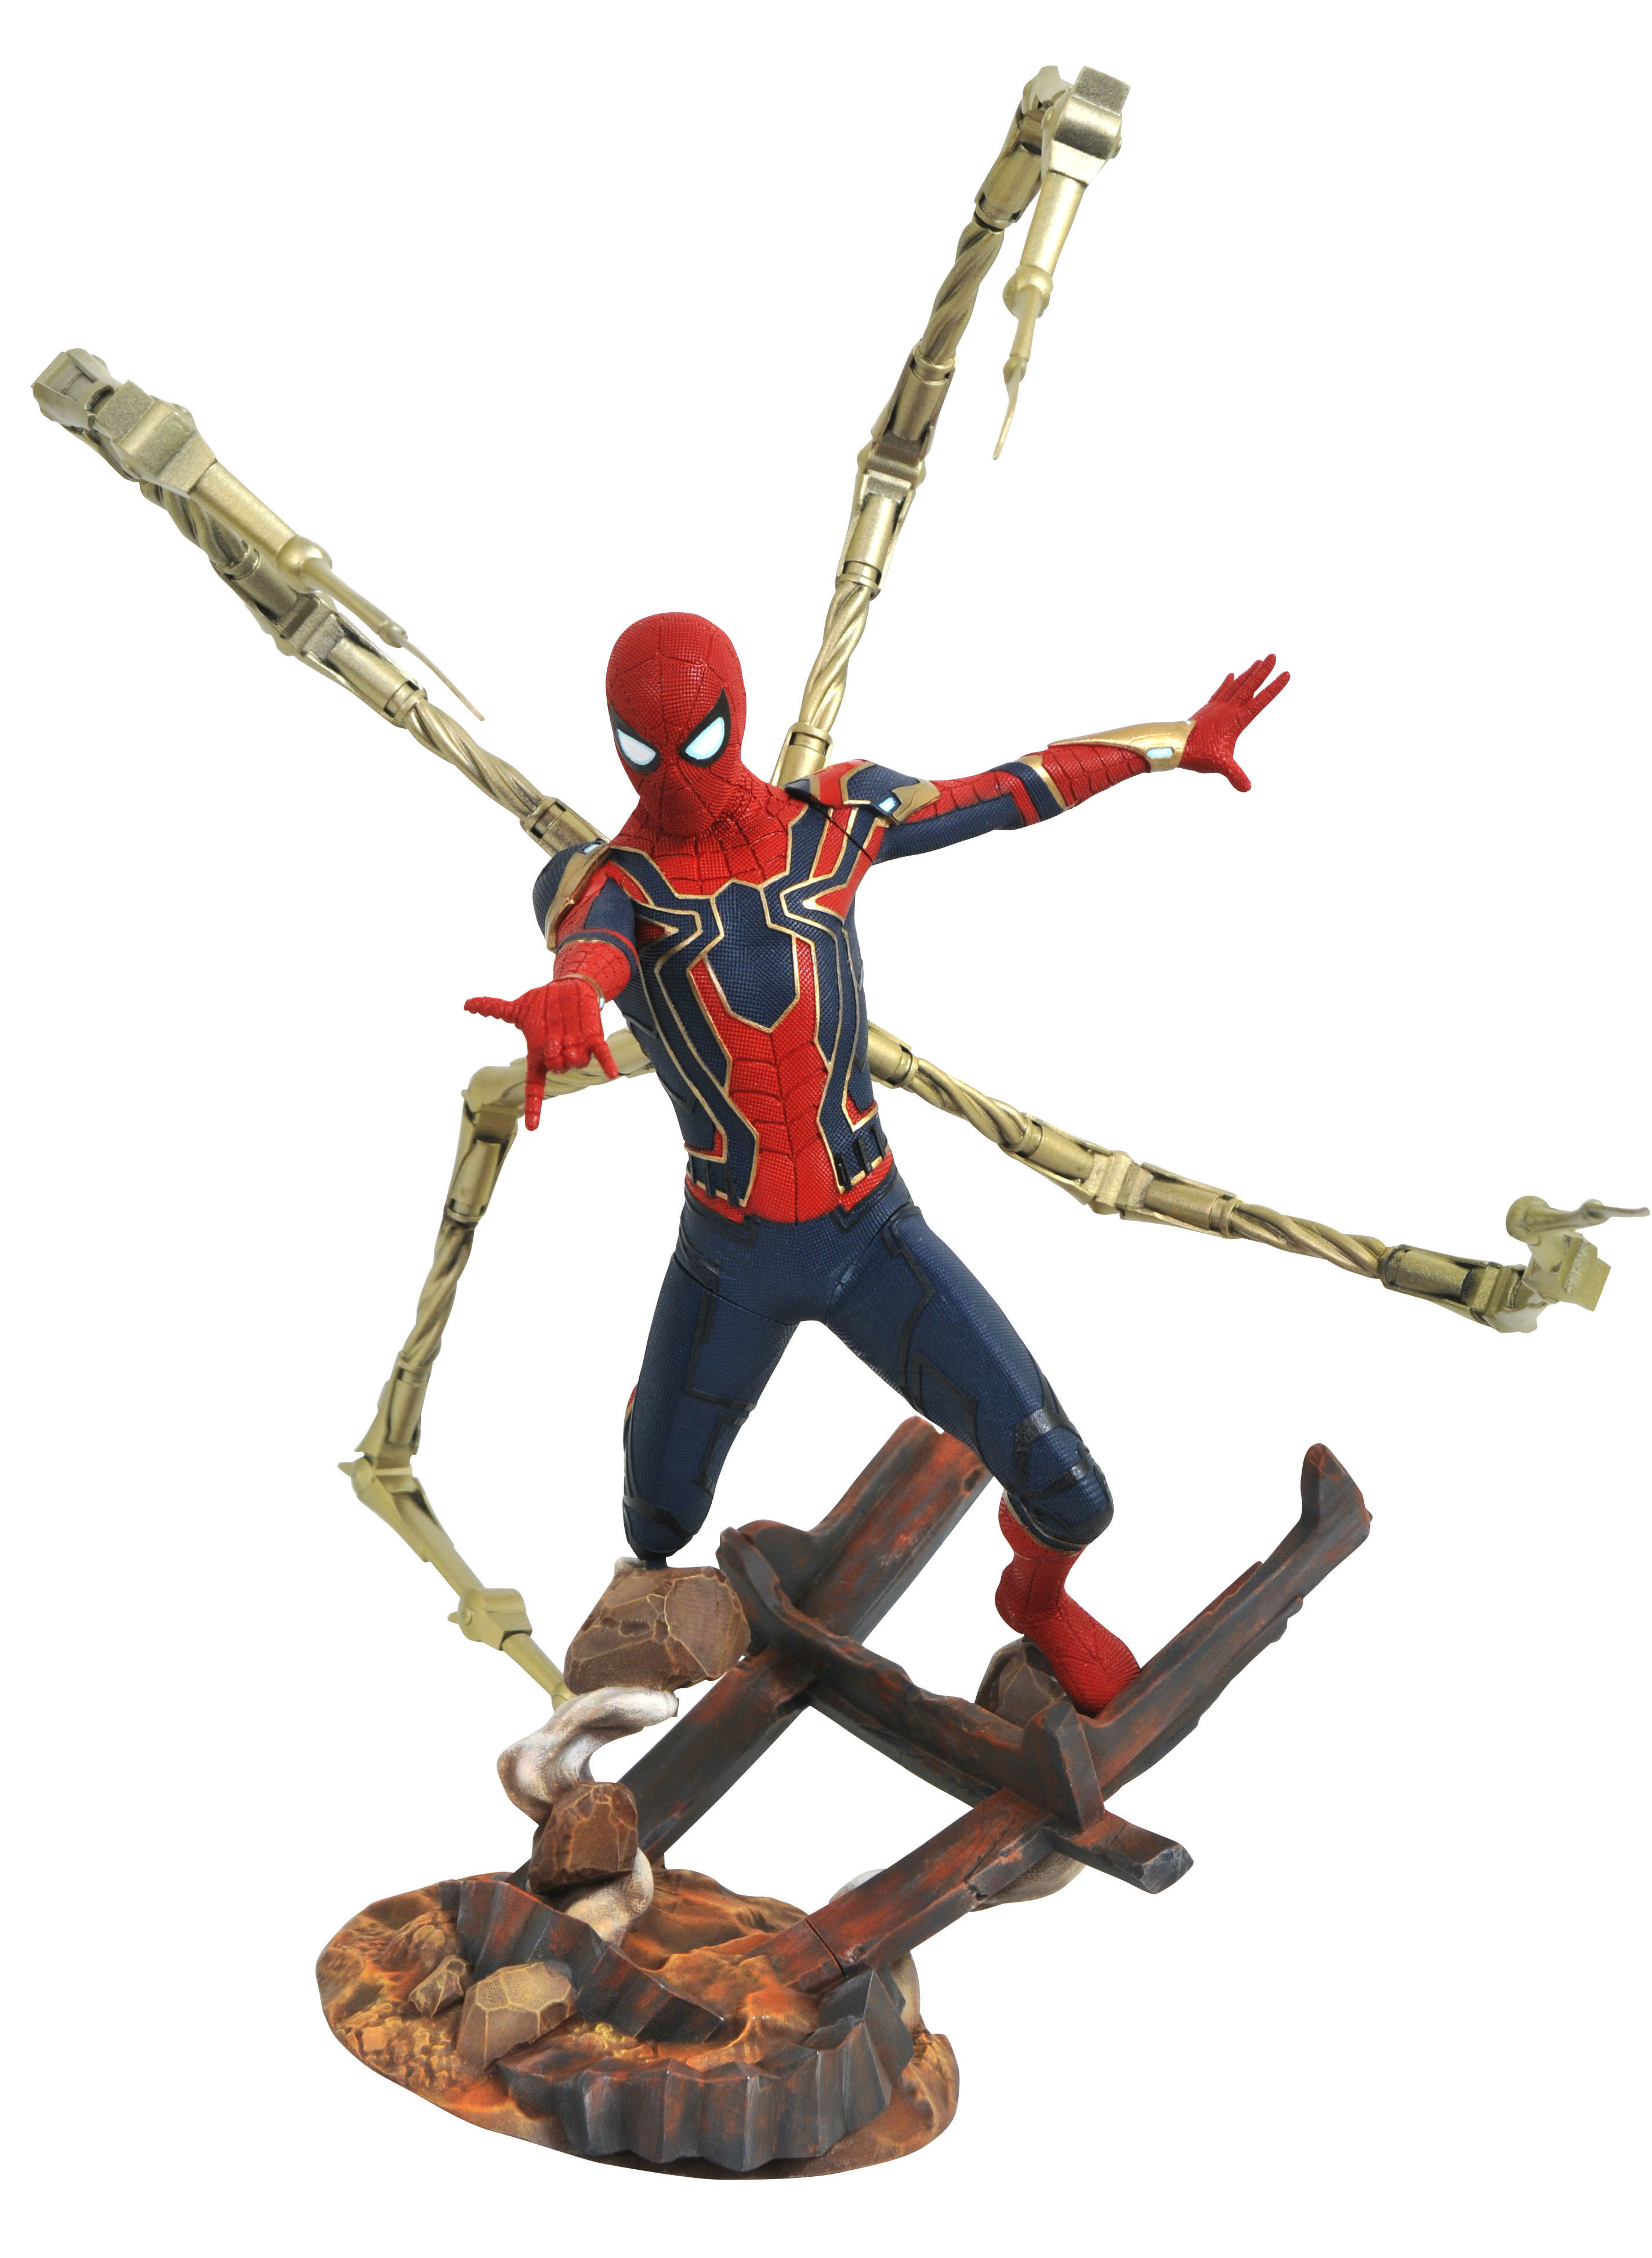 MARVEL PREMIER COLLECTION AVENGERS 3 IRON SPIDER-MAN STATUE